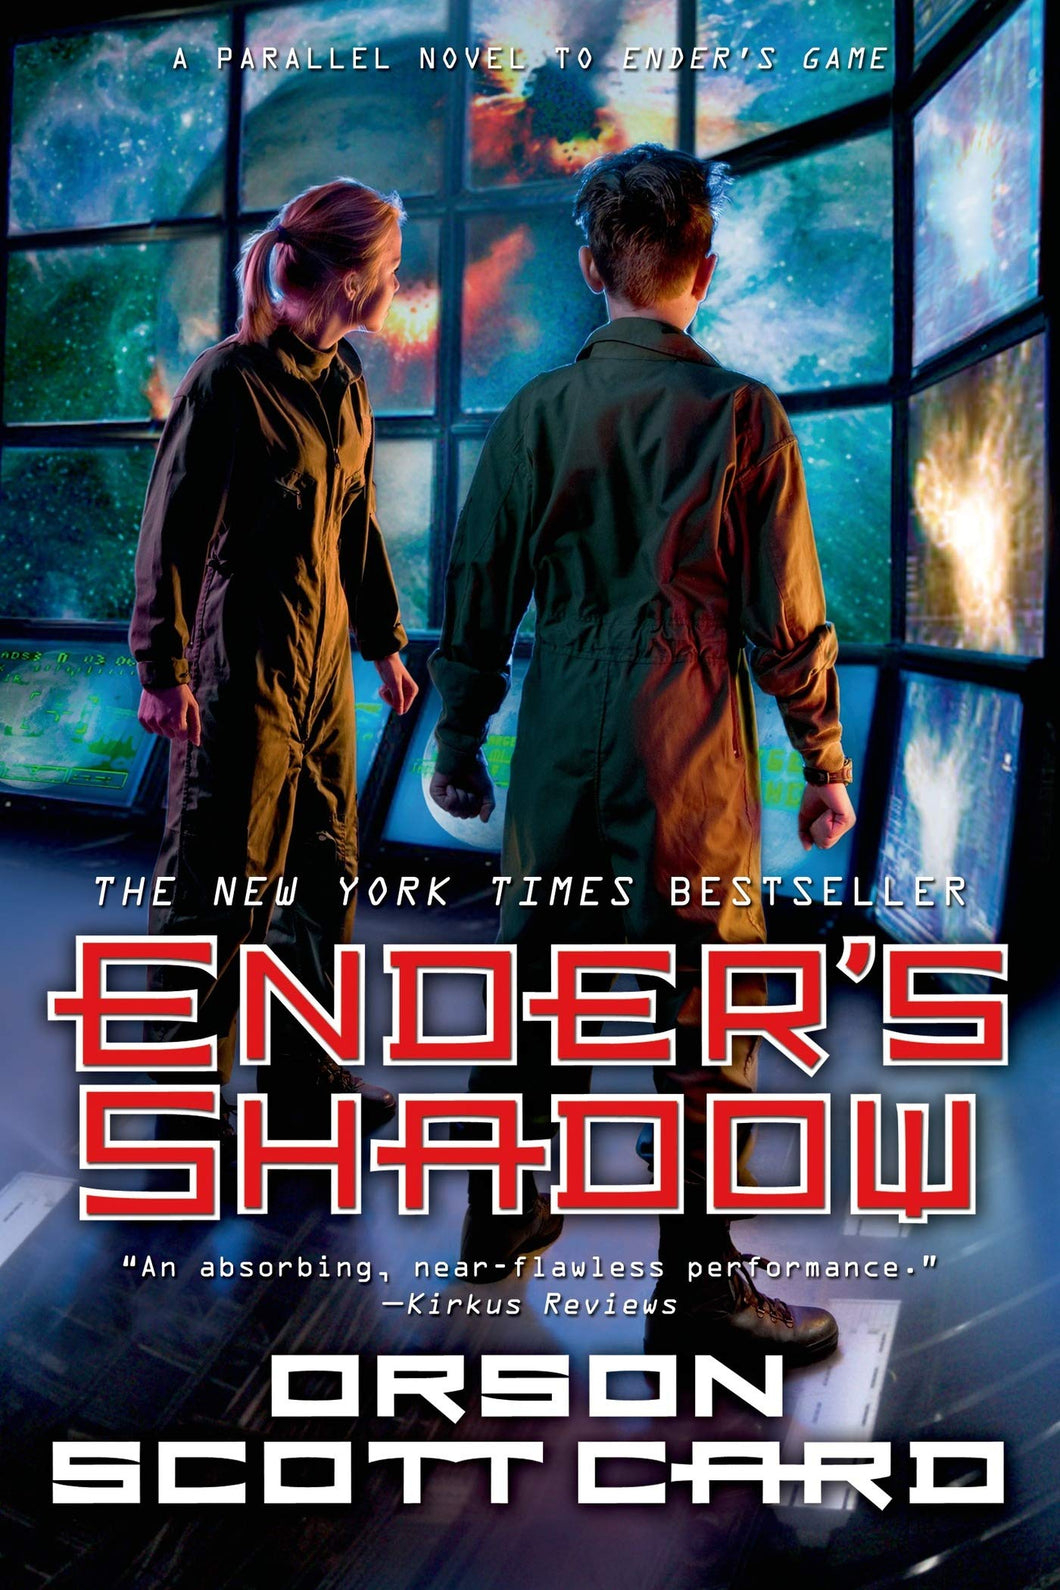 Ender's Shadow (The Shadow Series)